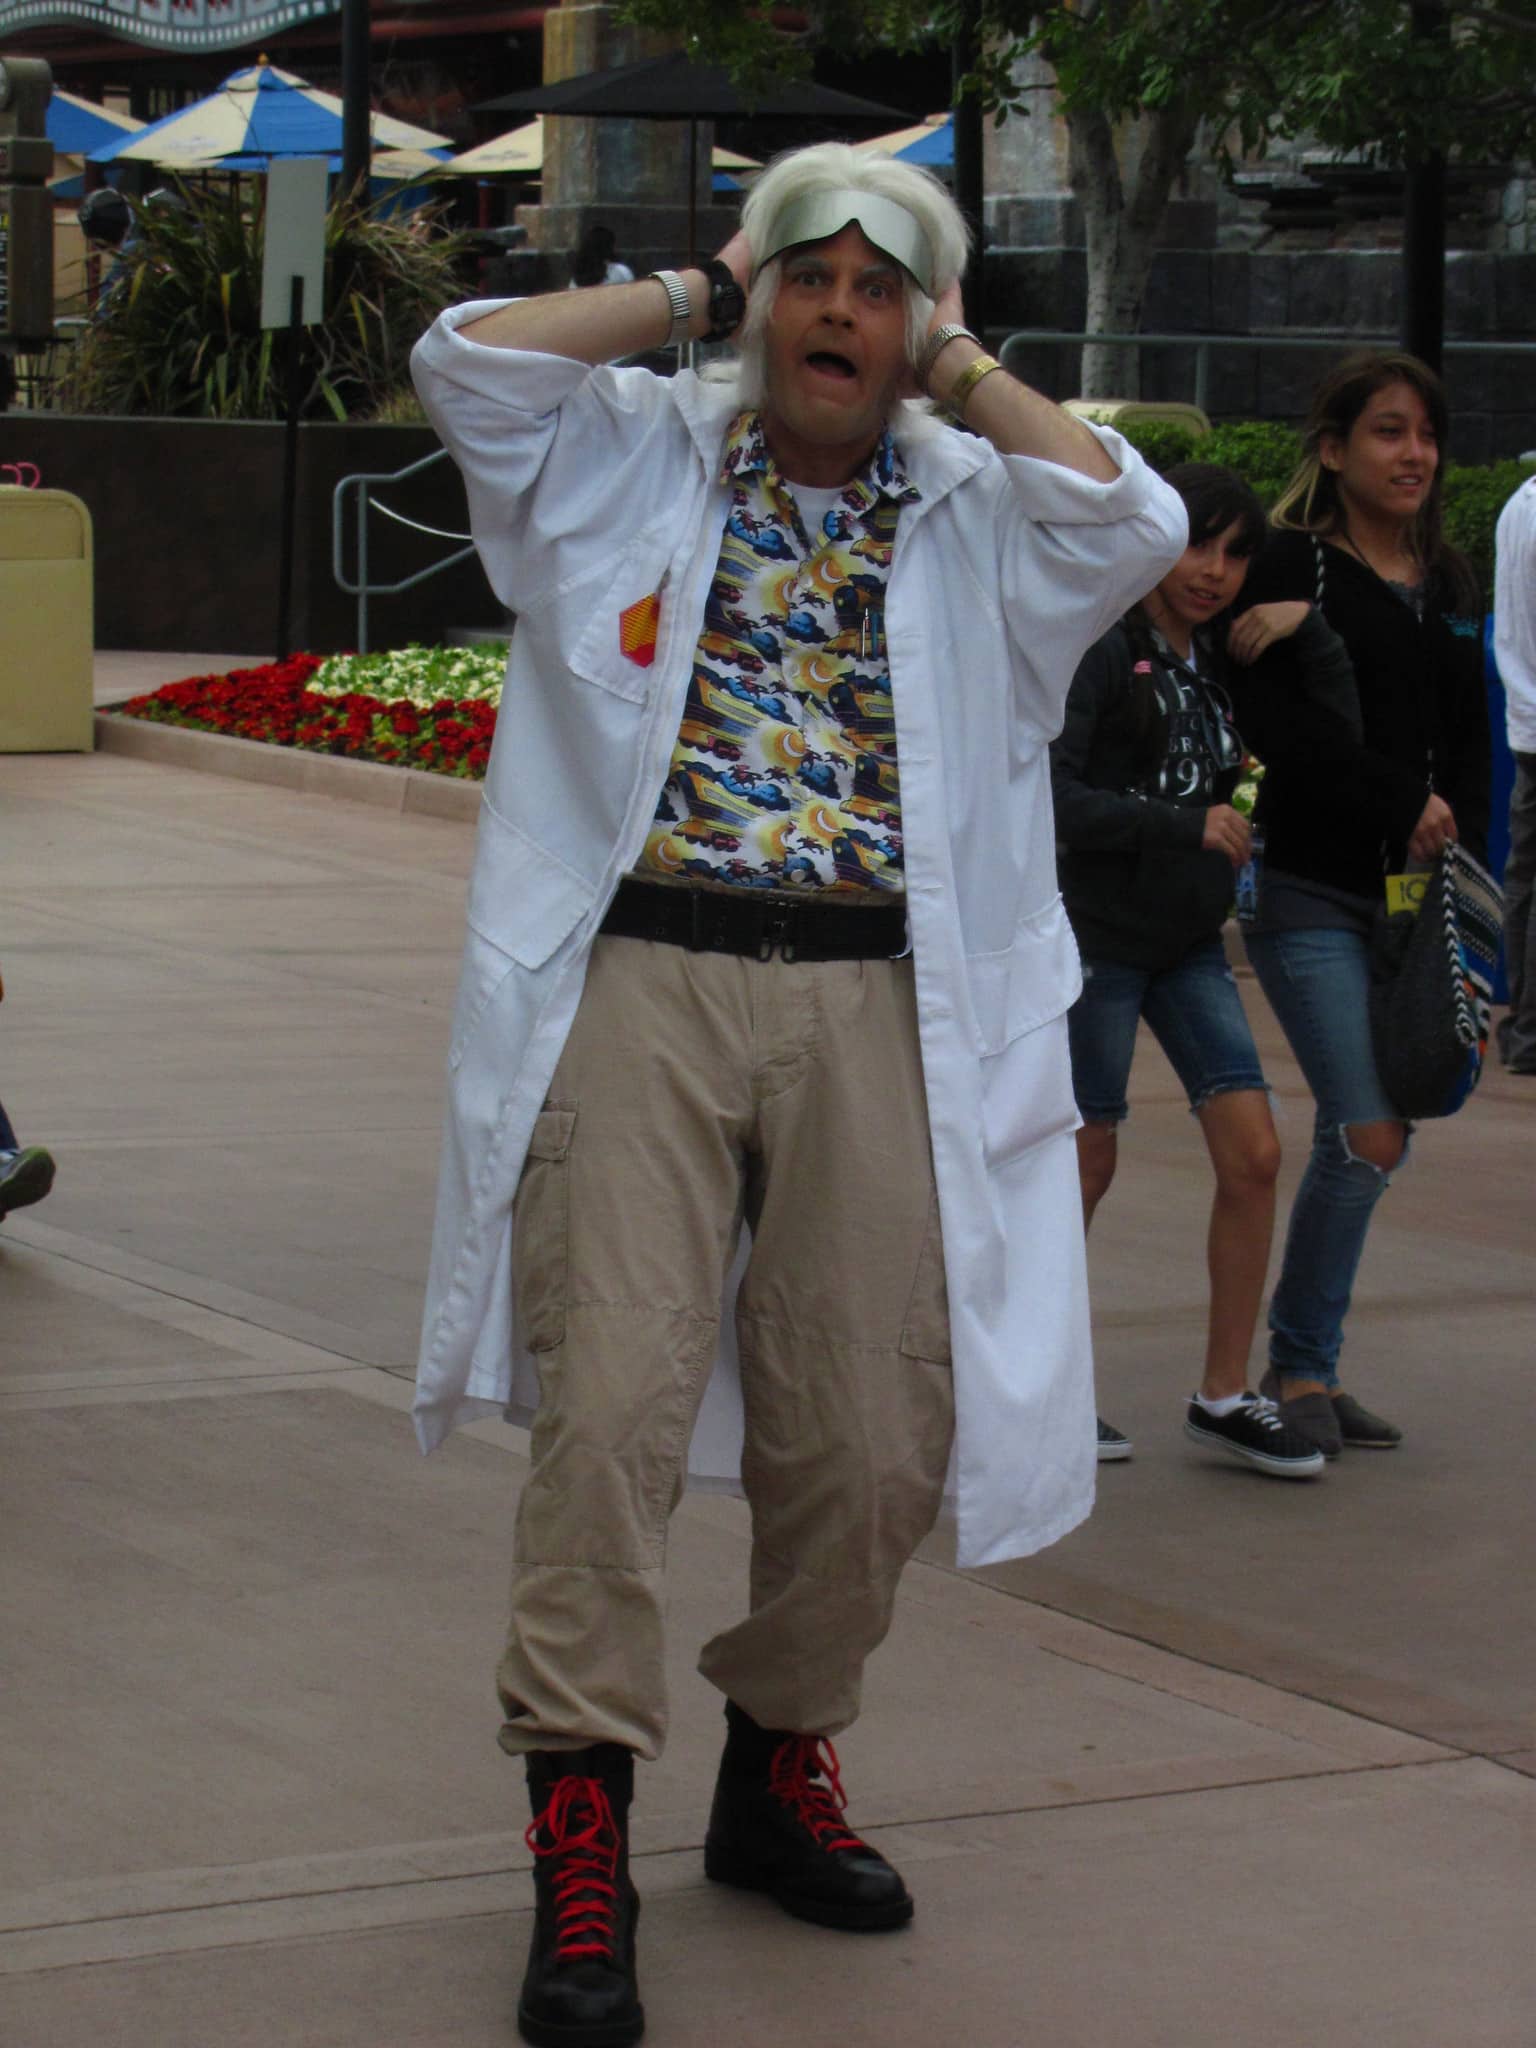 a man dressed as doc brown from the movie Back to the Future with a quizzical expression